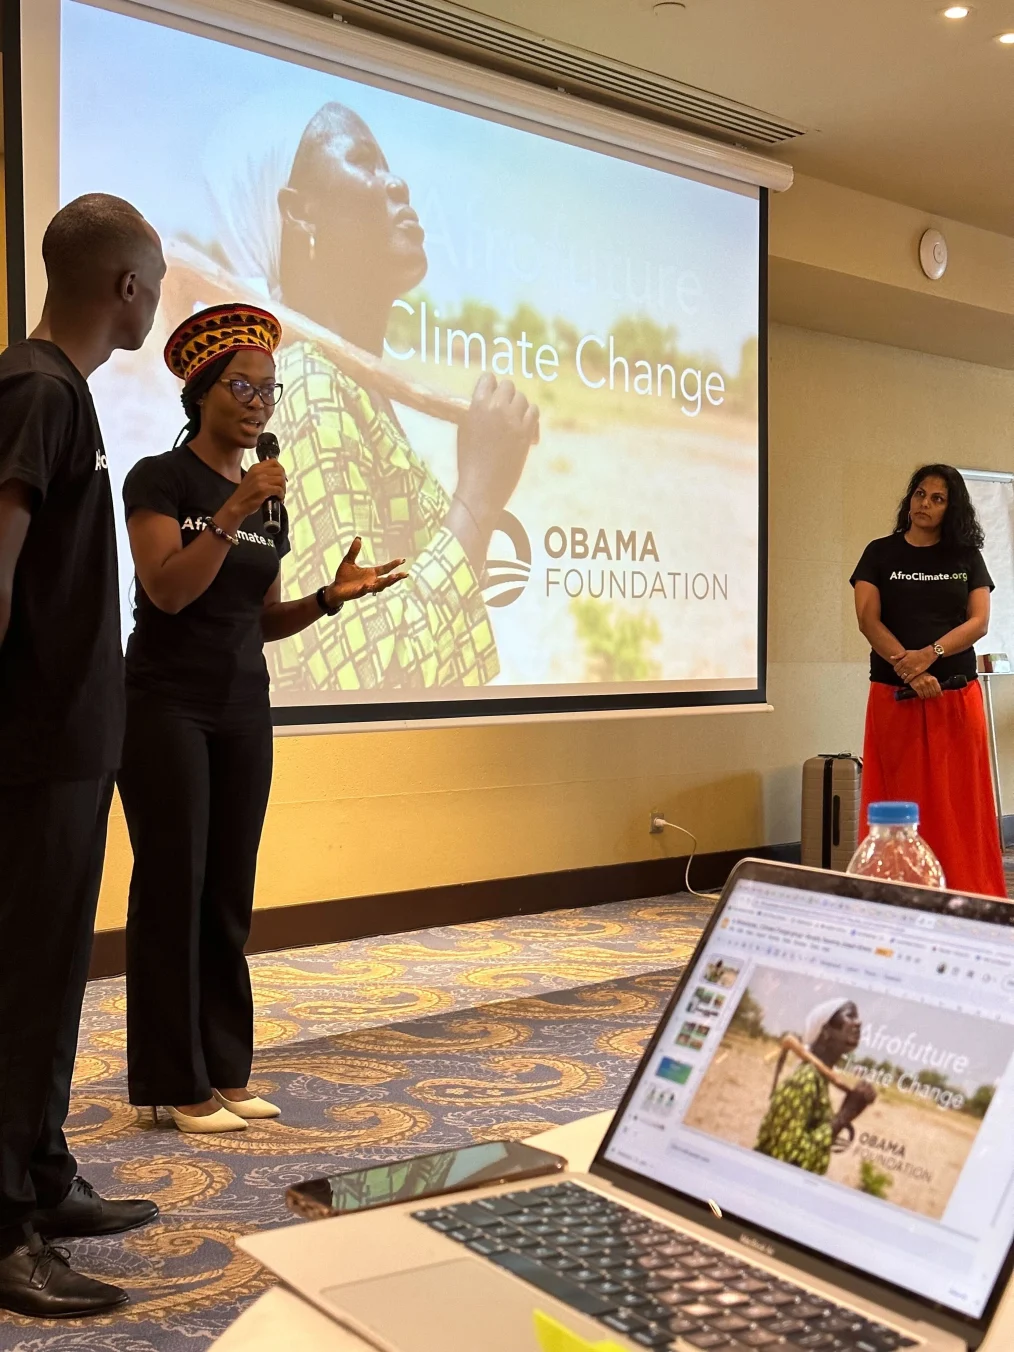 Beverly Ndifoin Niyang, a Black woman with a deep skin tone holds a microphone as she presents in front of a screen that reads, “Afrofuture,” “Climate Change,'' and “Obama Foundation.” On her right is Joseph Nguthiru, a Black man with a deep skin tone. To her left is Nassima Sadar-Gravier, a woman with a medium skin tone. All are wearing shirts that read, “AfroClimate.org.”